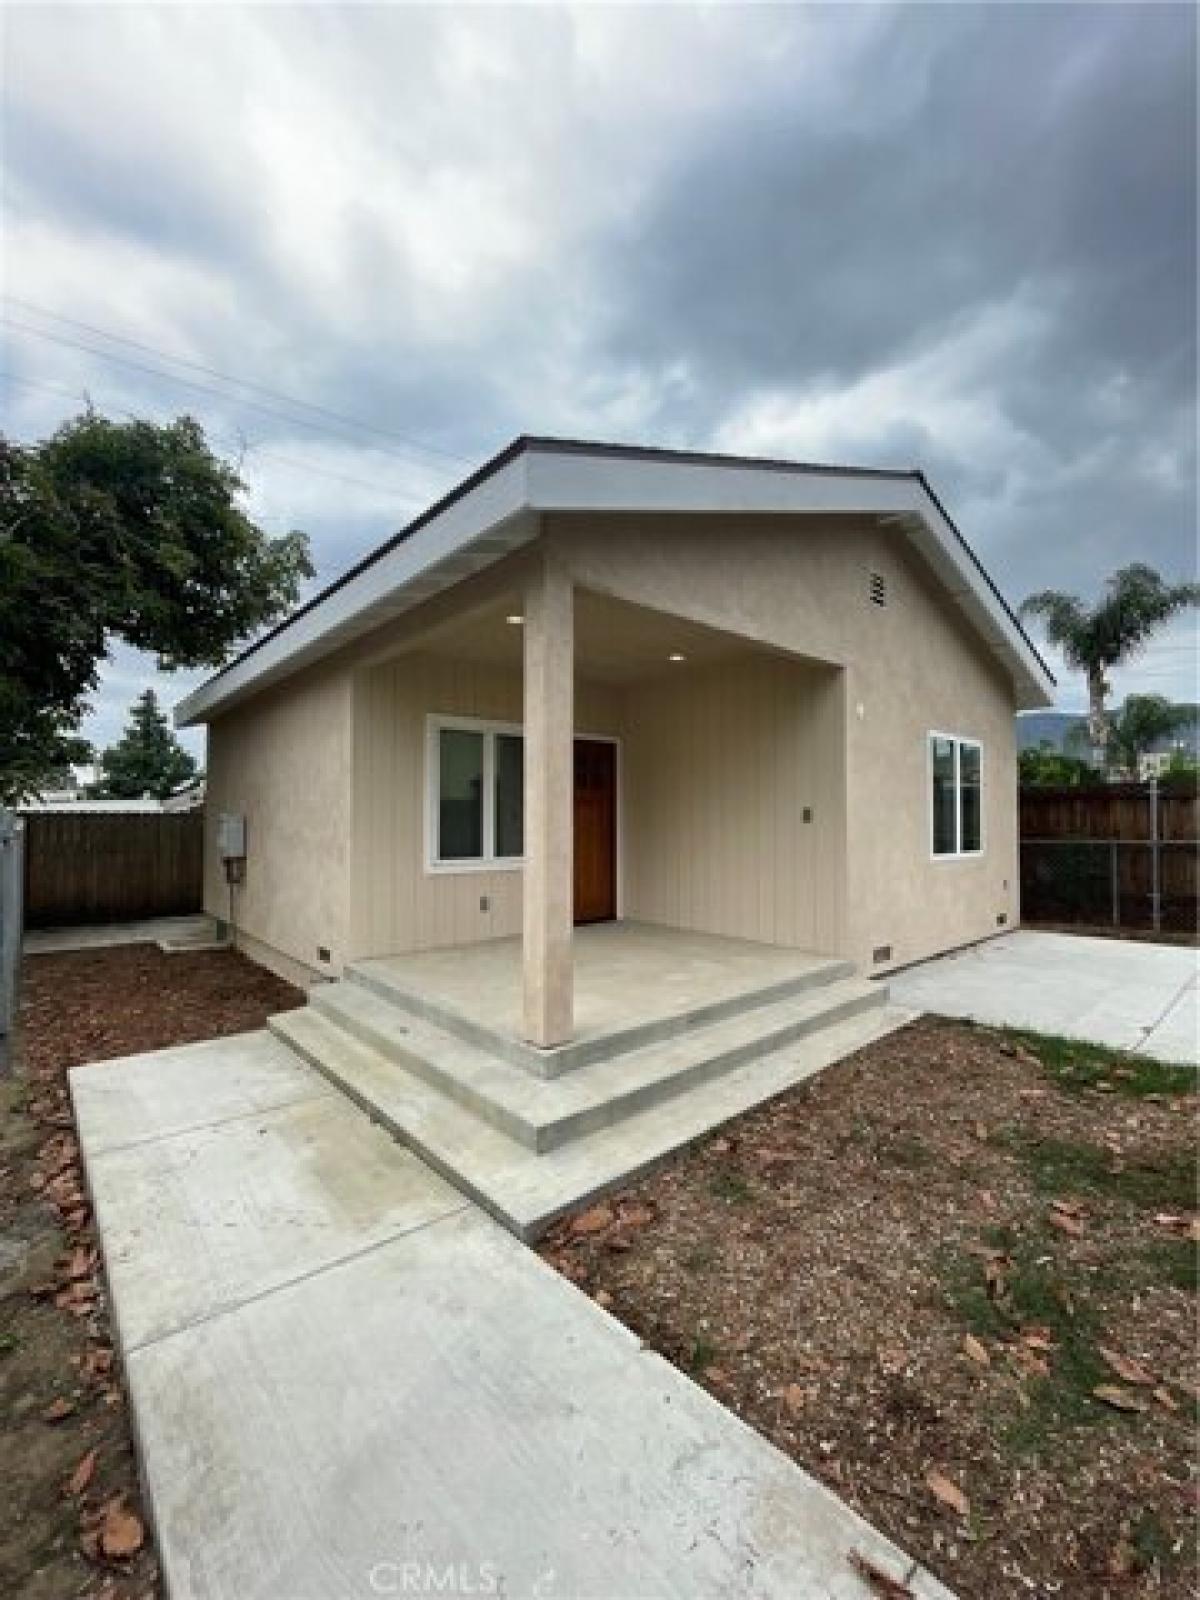 Picture of Home For Rent in Glendora, California, United States